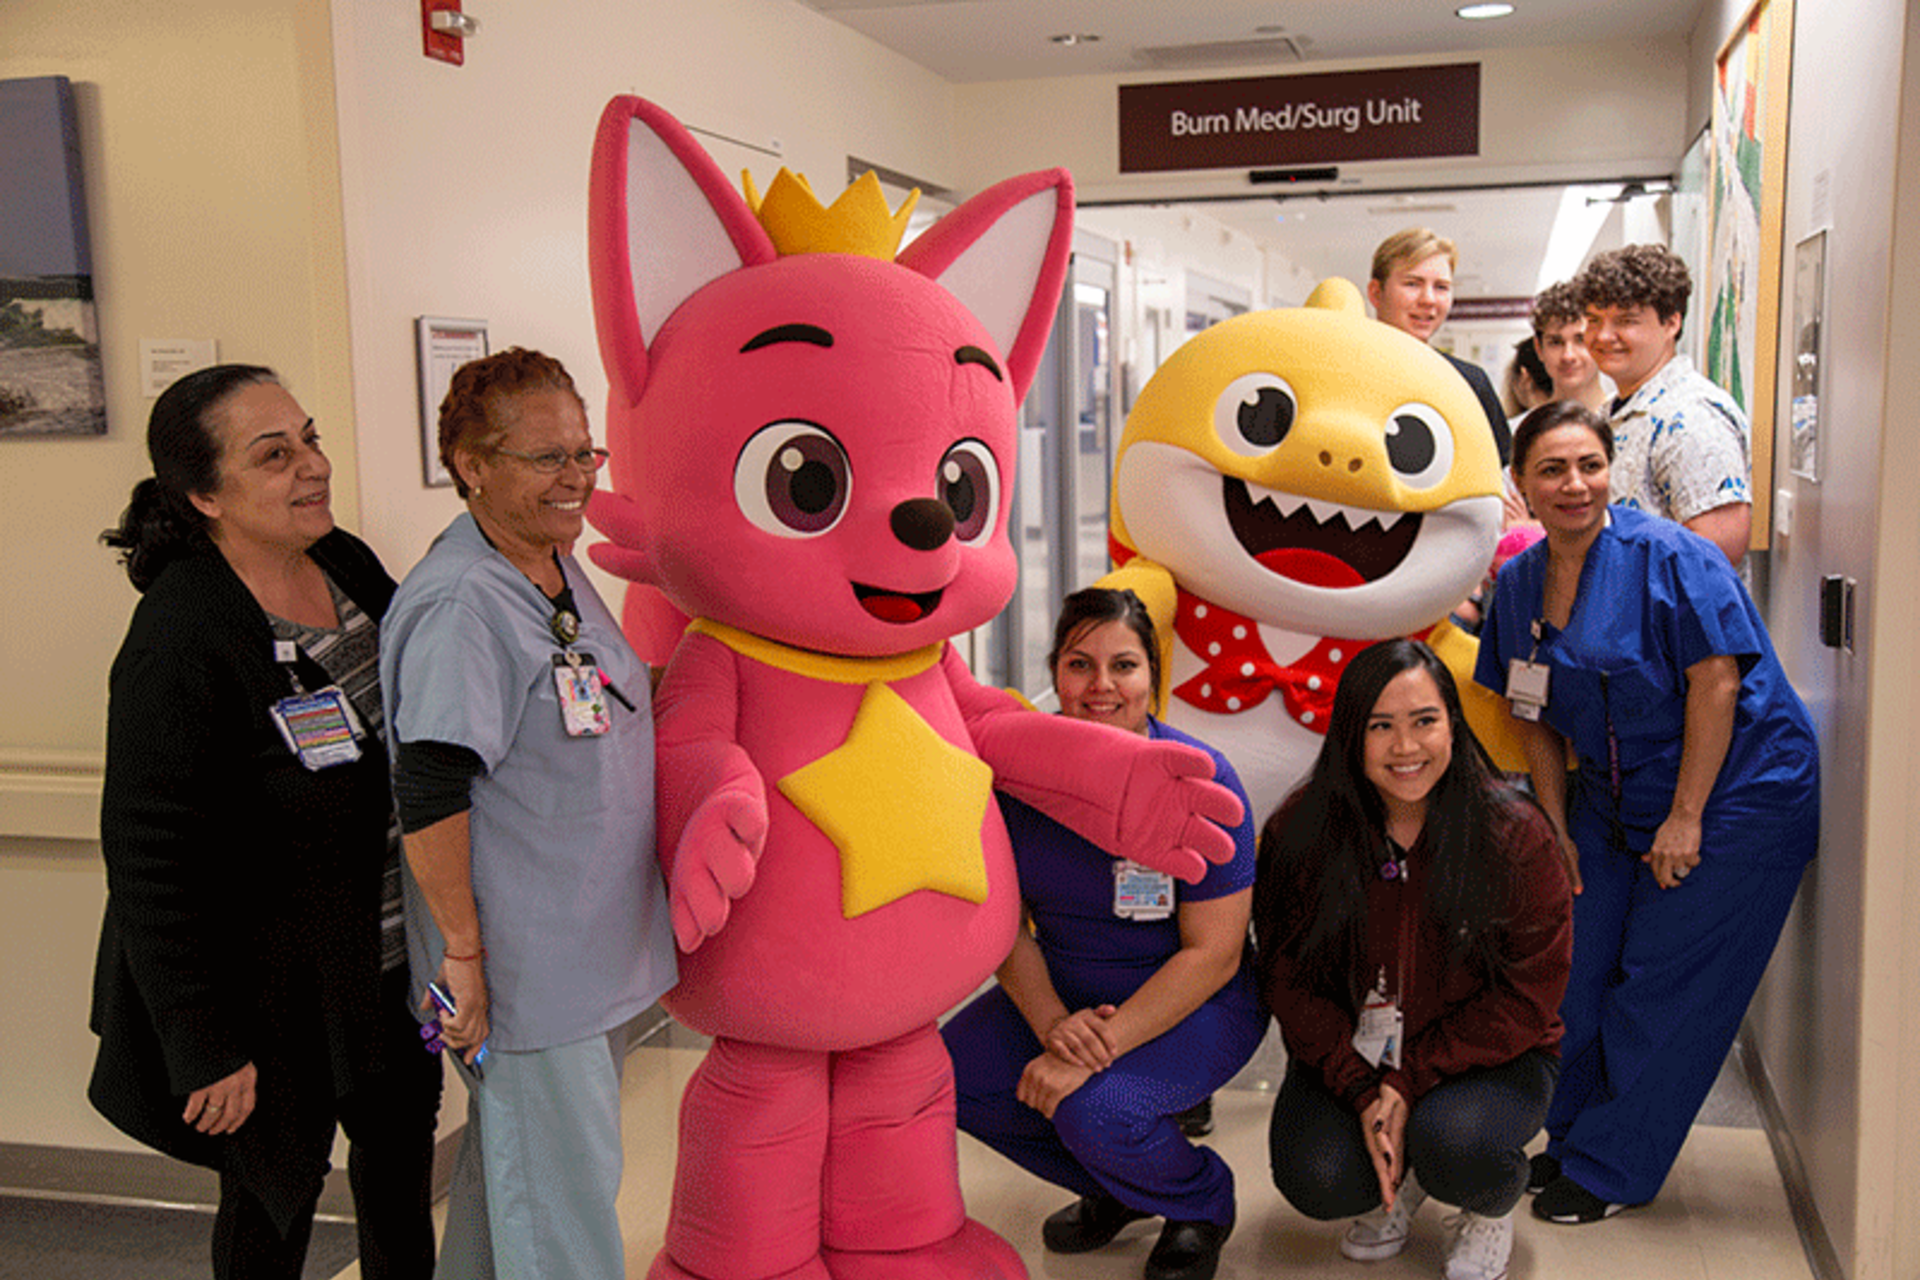 Pinkfong and Baby Shark posing with some of the patients in the pediatric unit